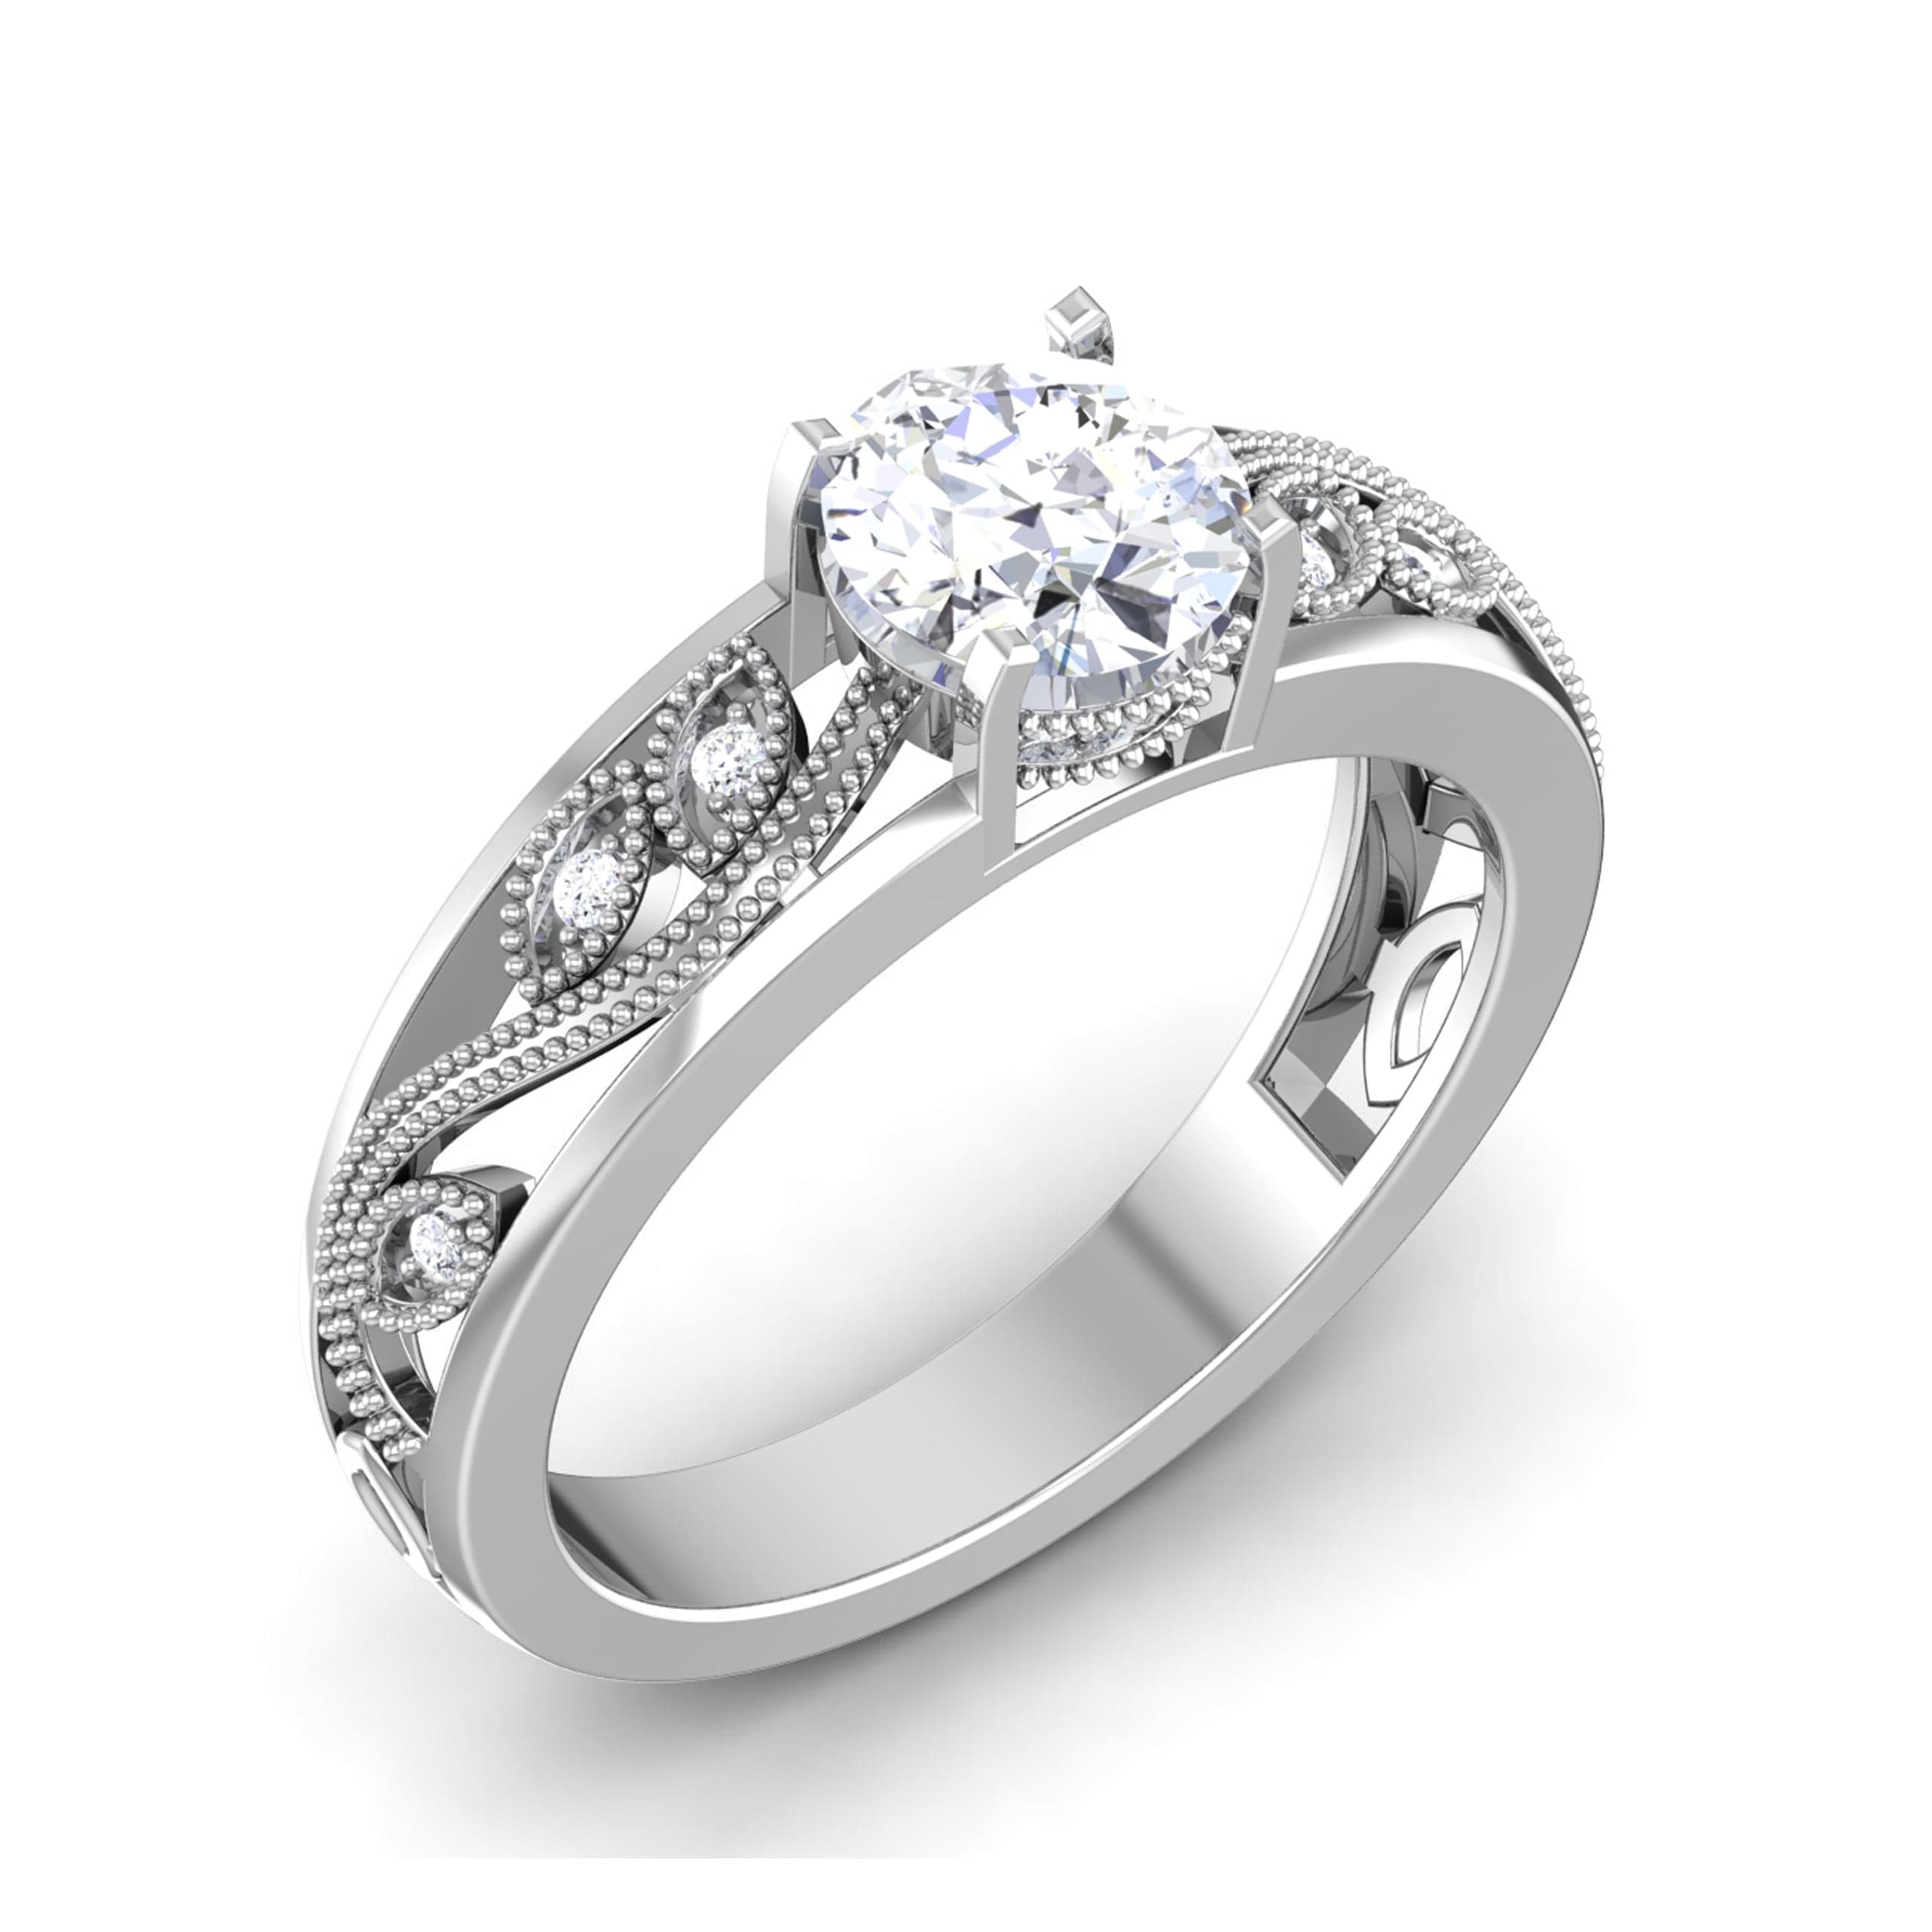 Cathedral Setting Rings - Architectural Beauty in Diamond Rings